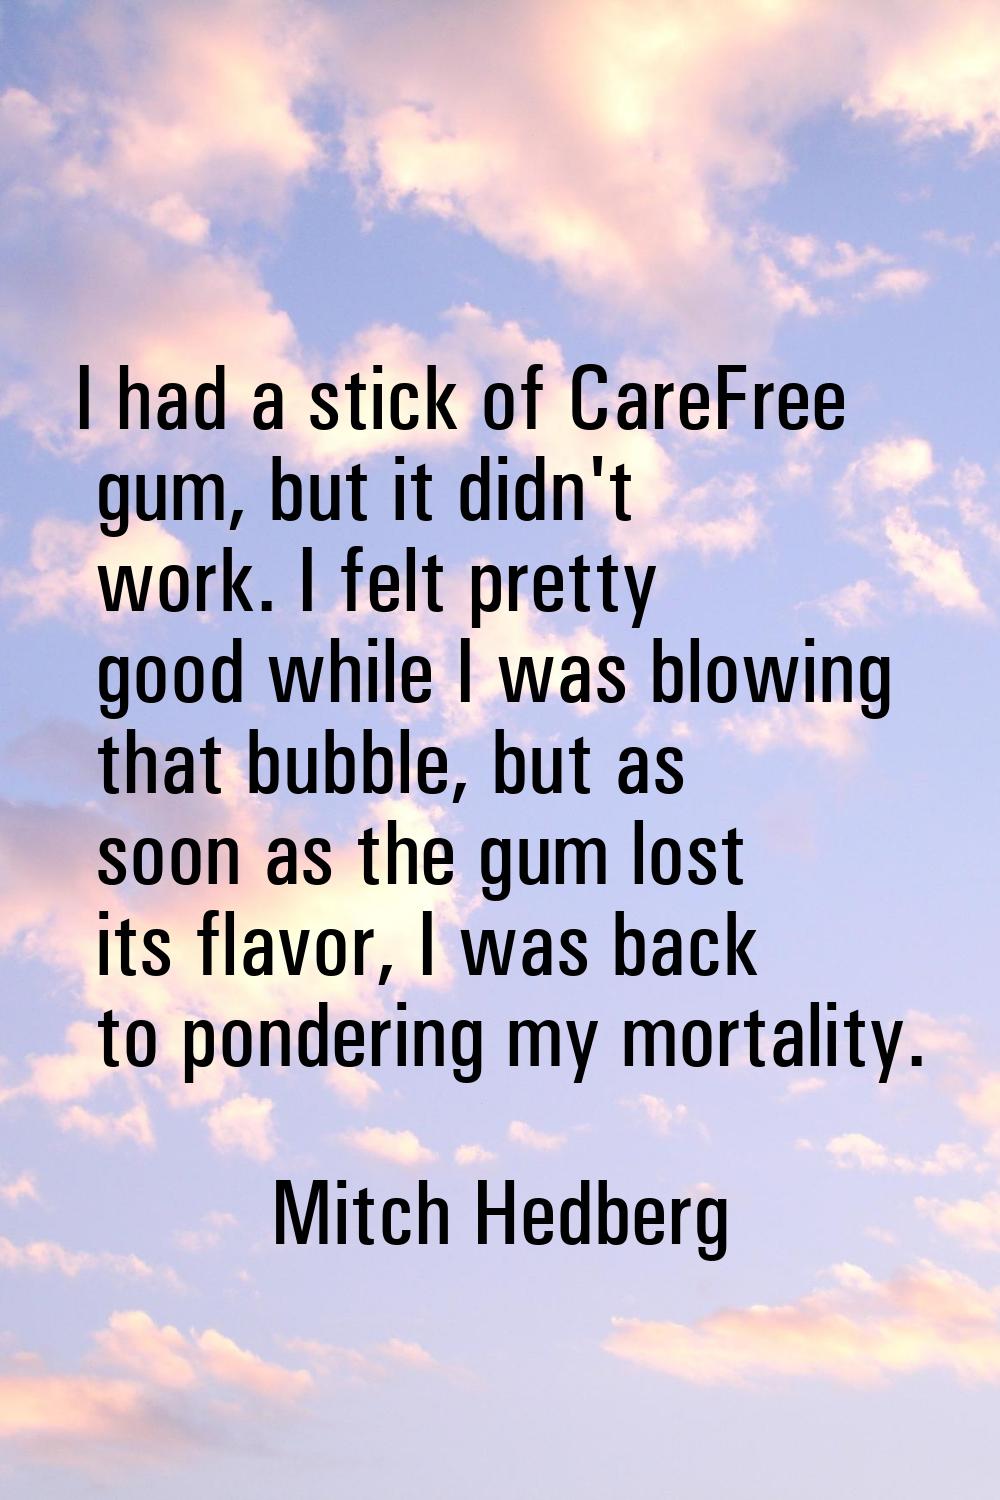 I had a stick of CareFree gum, but it didn't work. I felt pretty good while I was blowing that bubb